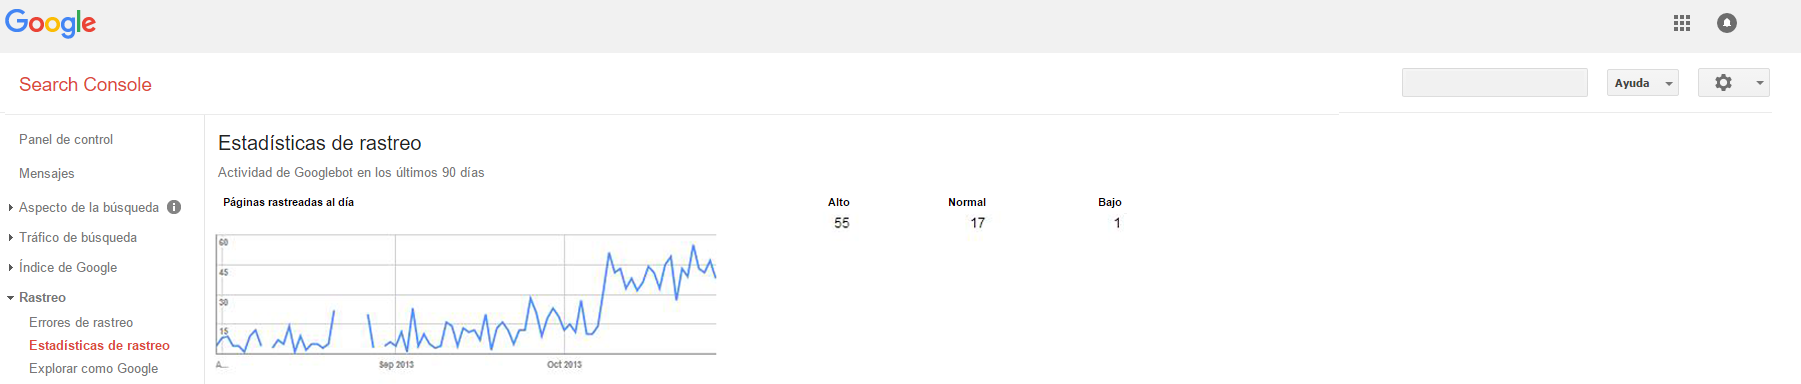 spanish Google search console example